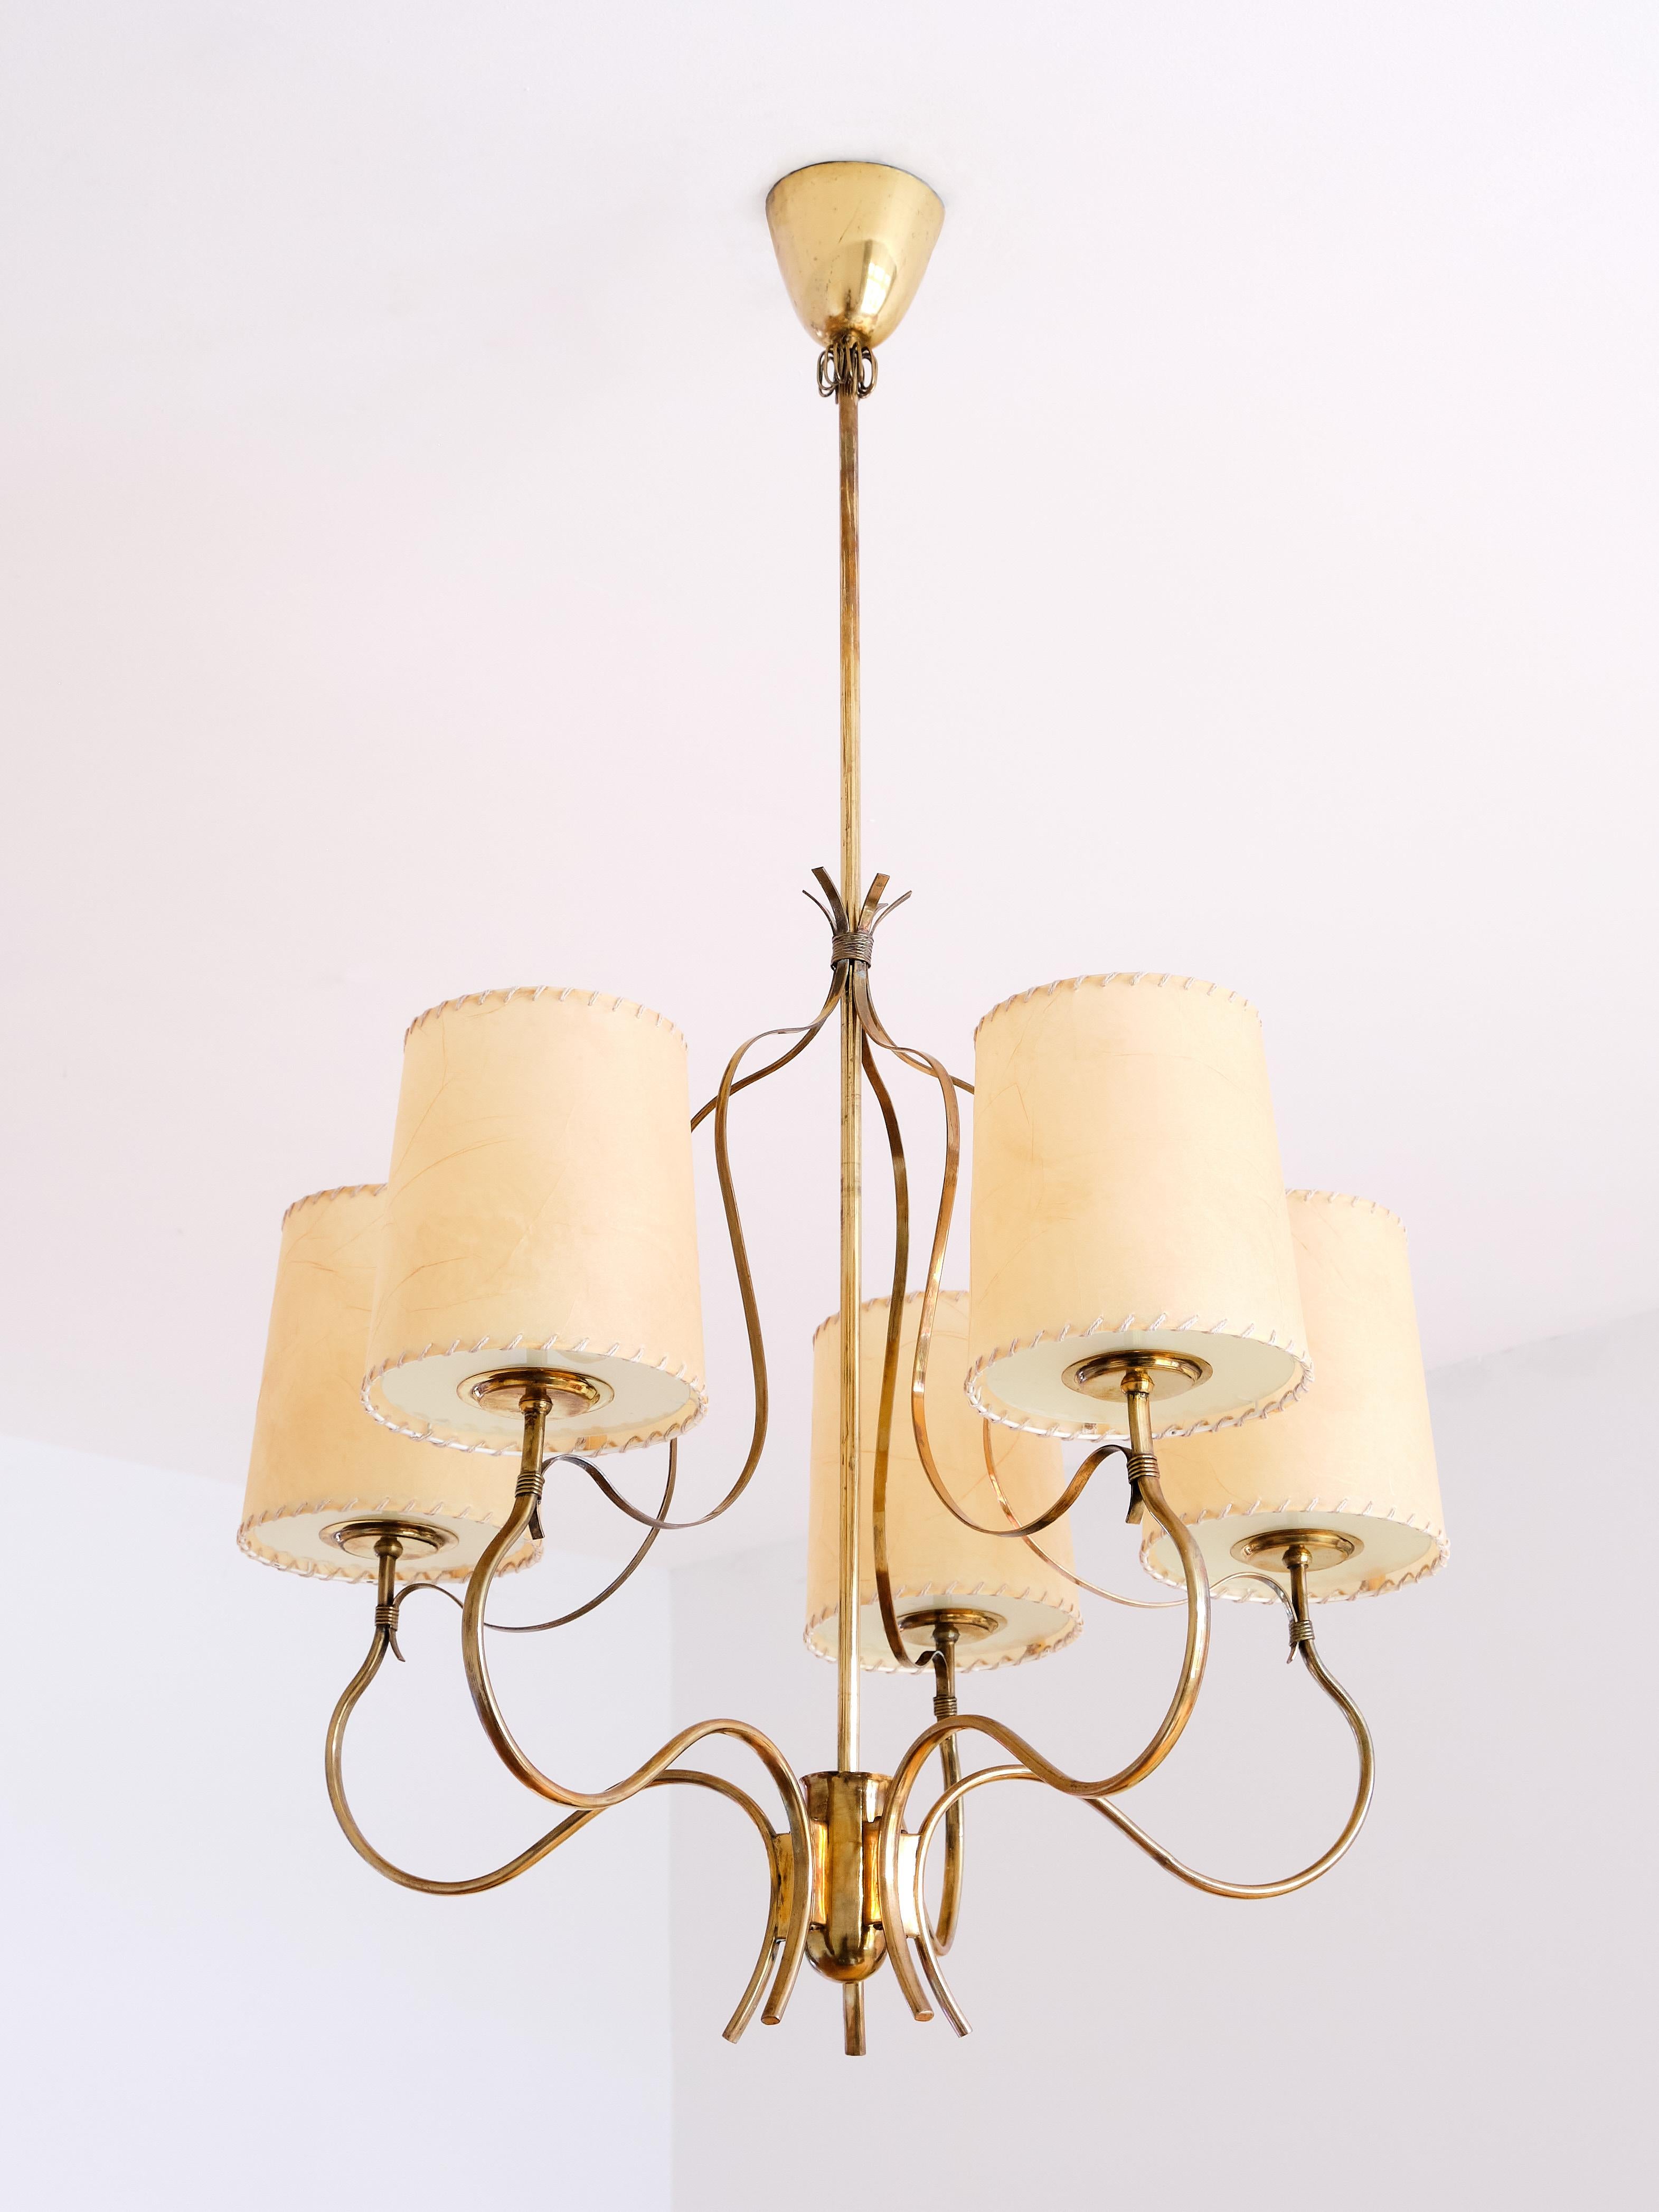 Paavo Tynell Chandelier in Brass and Parchment, Model 9001, Taito Finland, 1940s For Sale 3